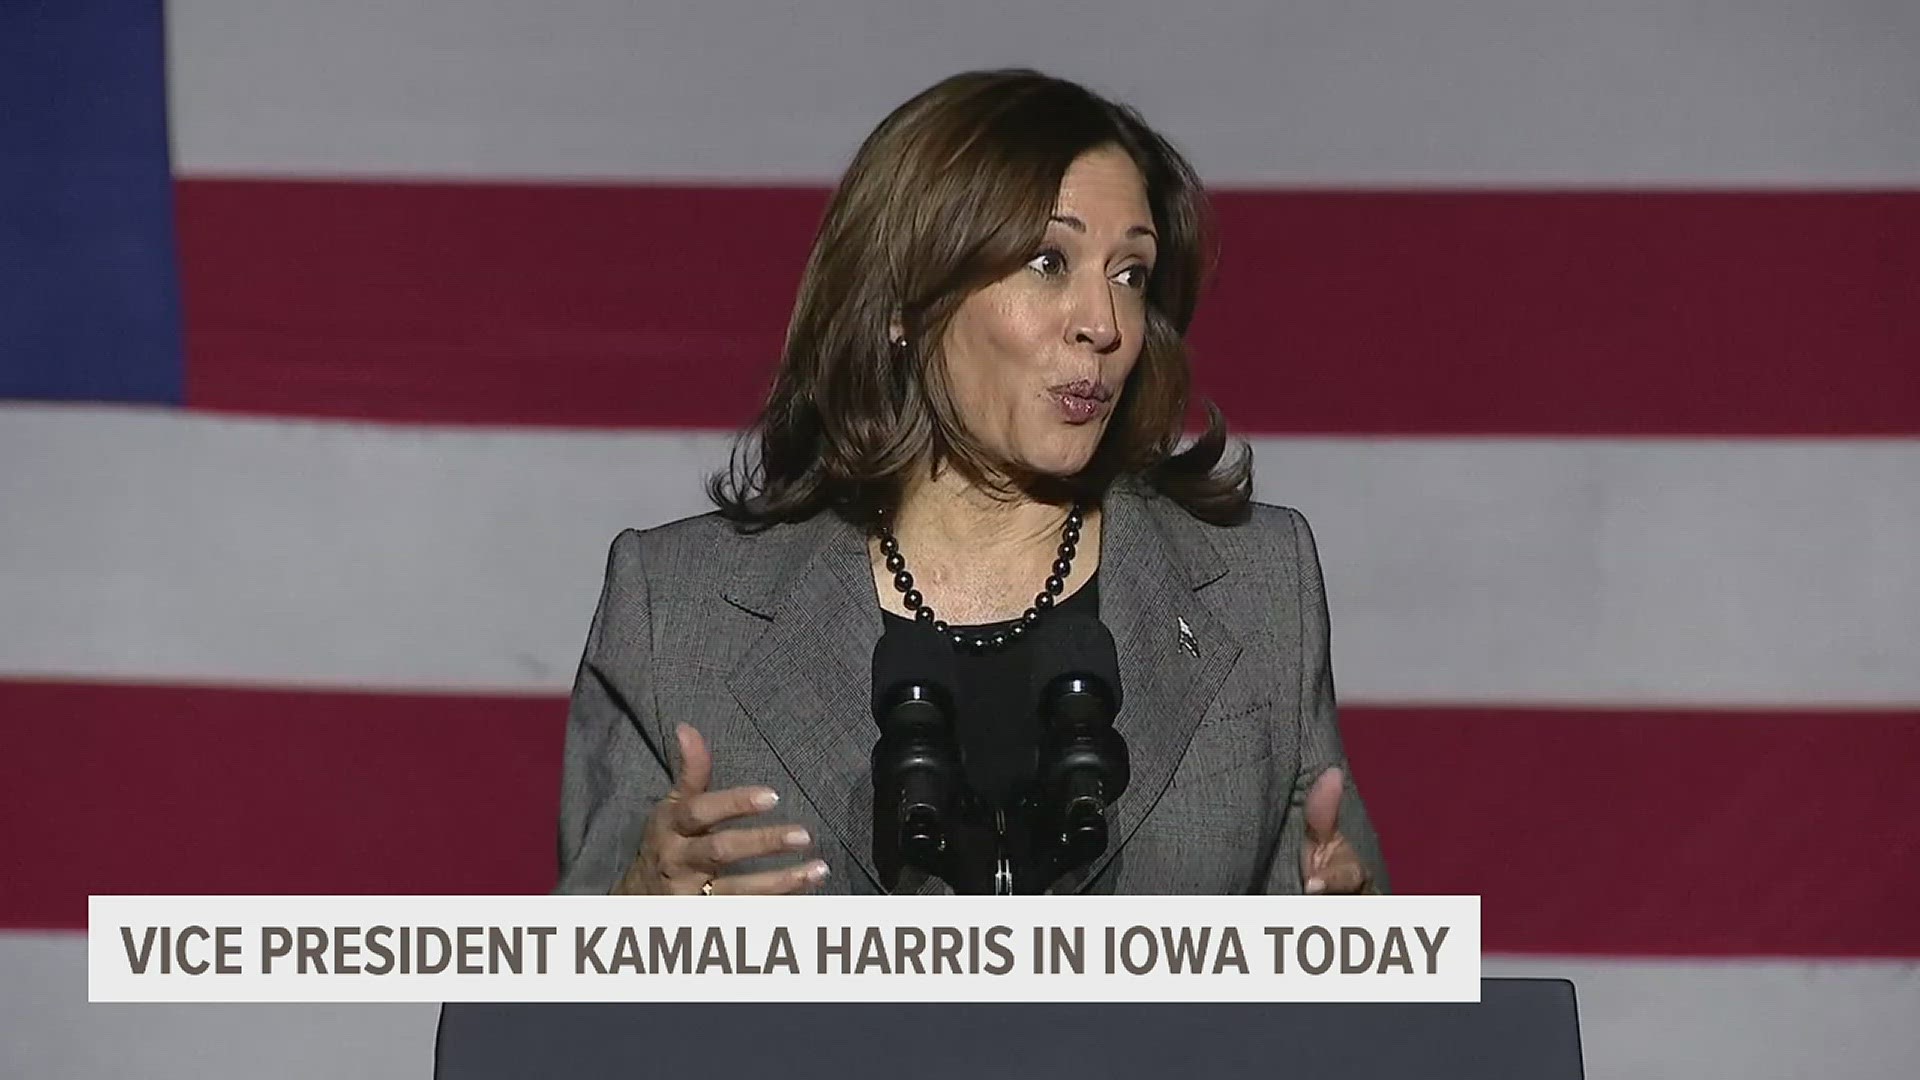 VP Harris visited Des Moines to speak on reproductive rights, and Pence will be speaking and dining with Iowa Republicans.